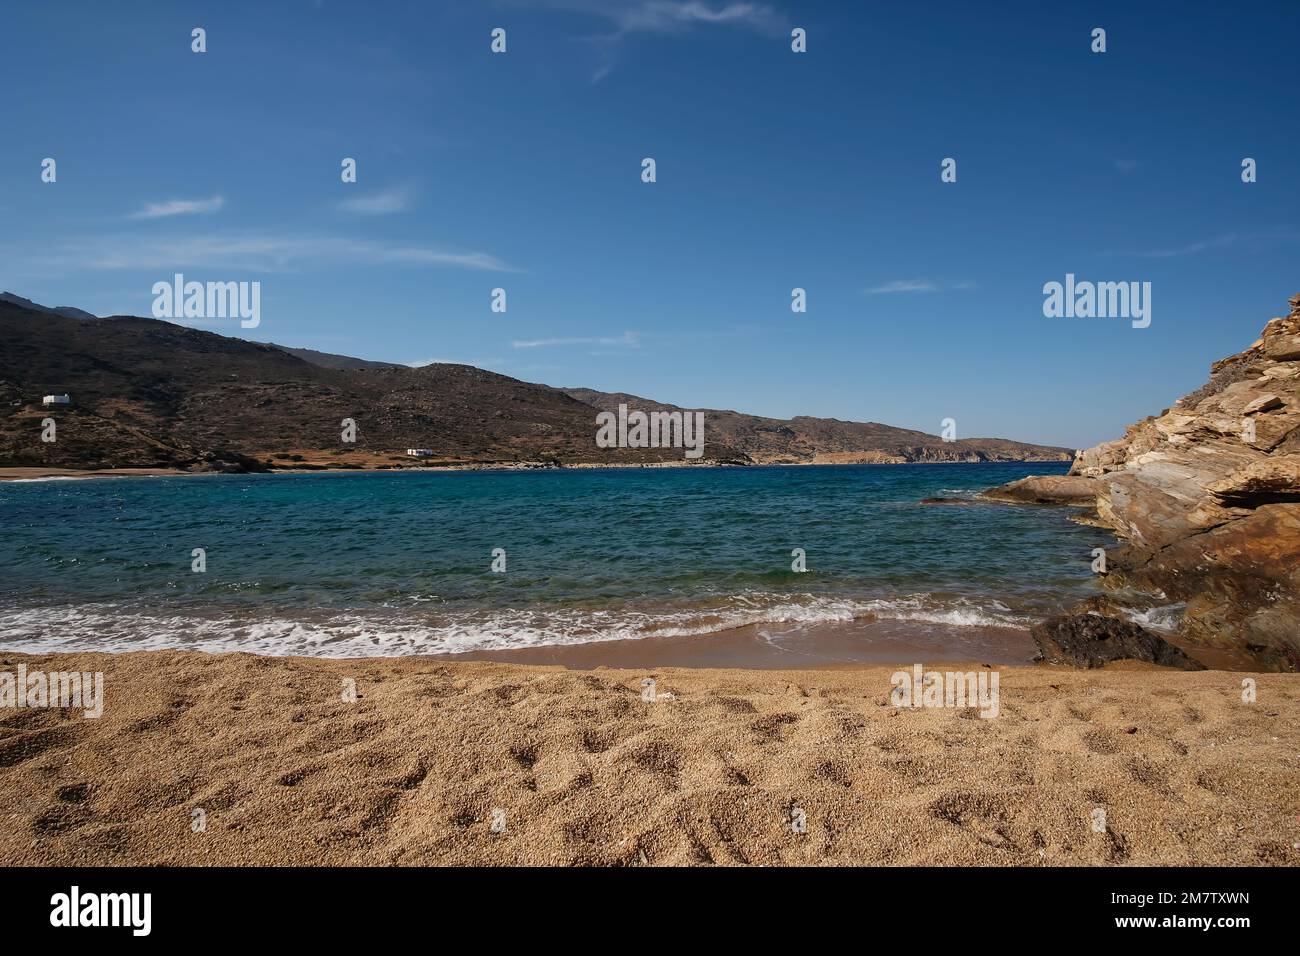 The amazing sandy and turquoise beach of Kalamos in Ios Cyclades Greece Stock Photo